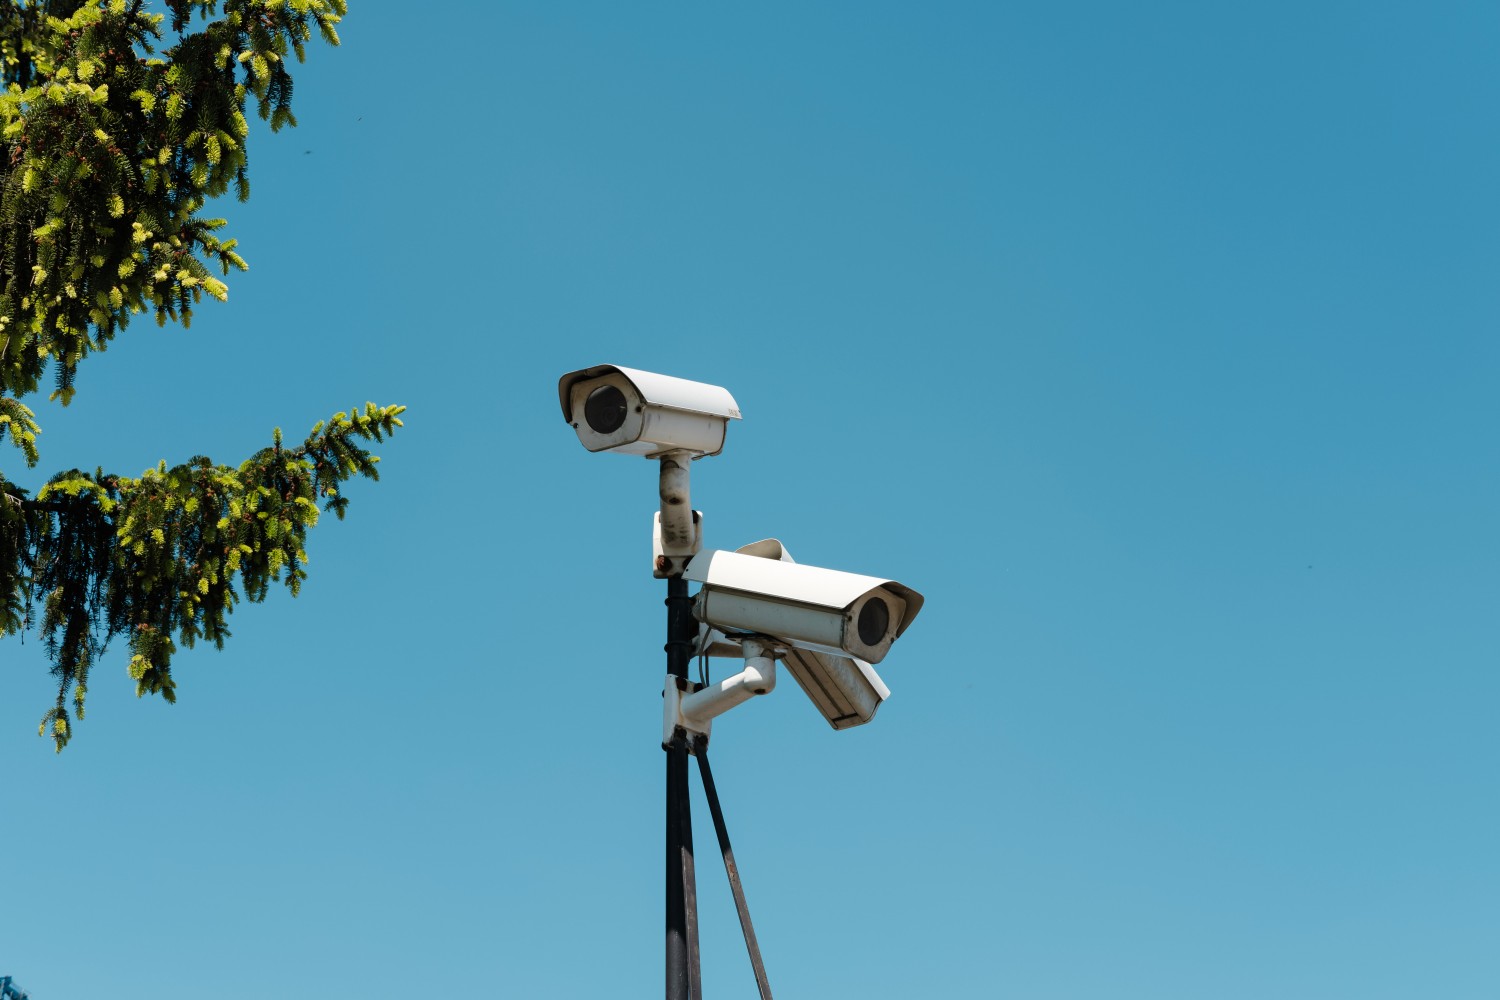 About Security Cameras for Outside Use